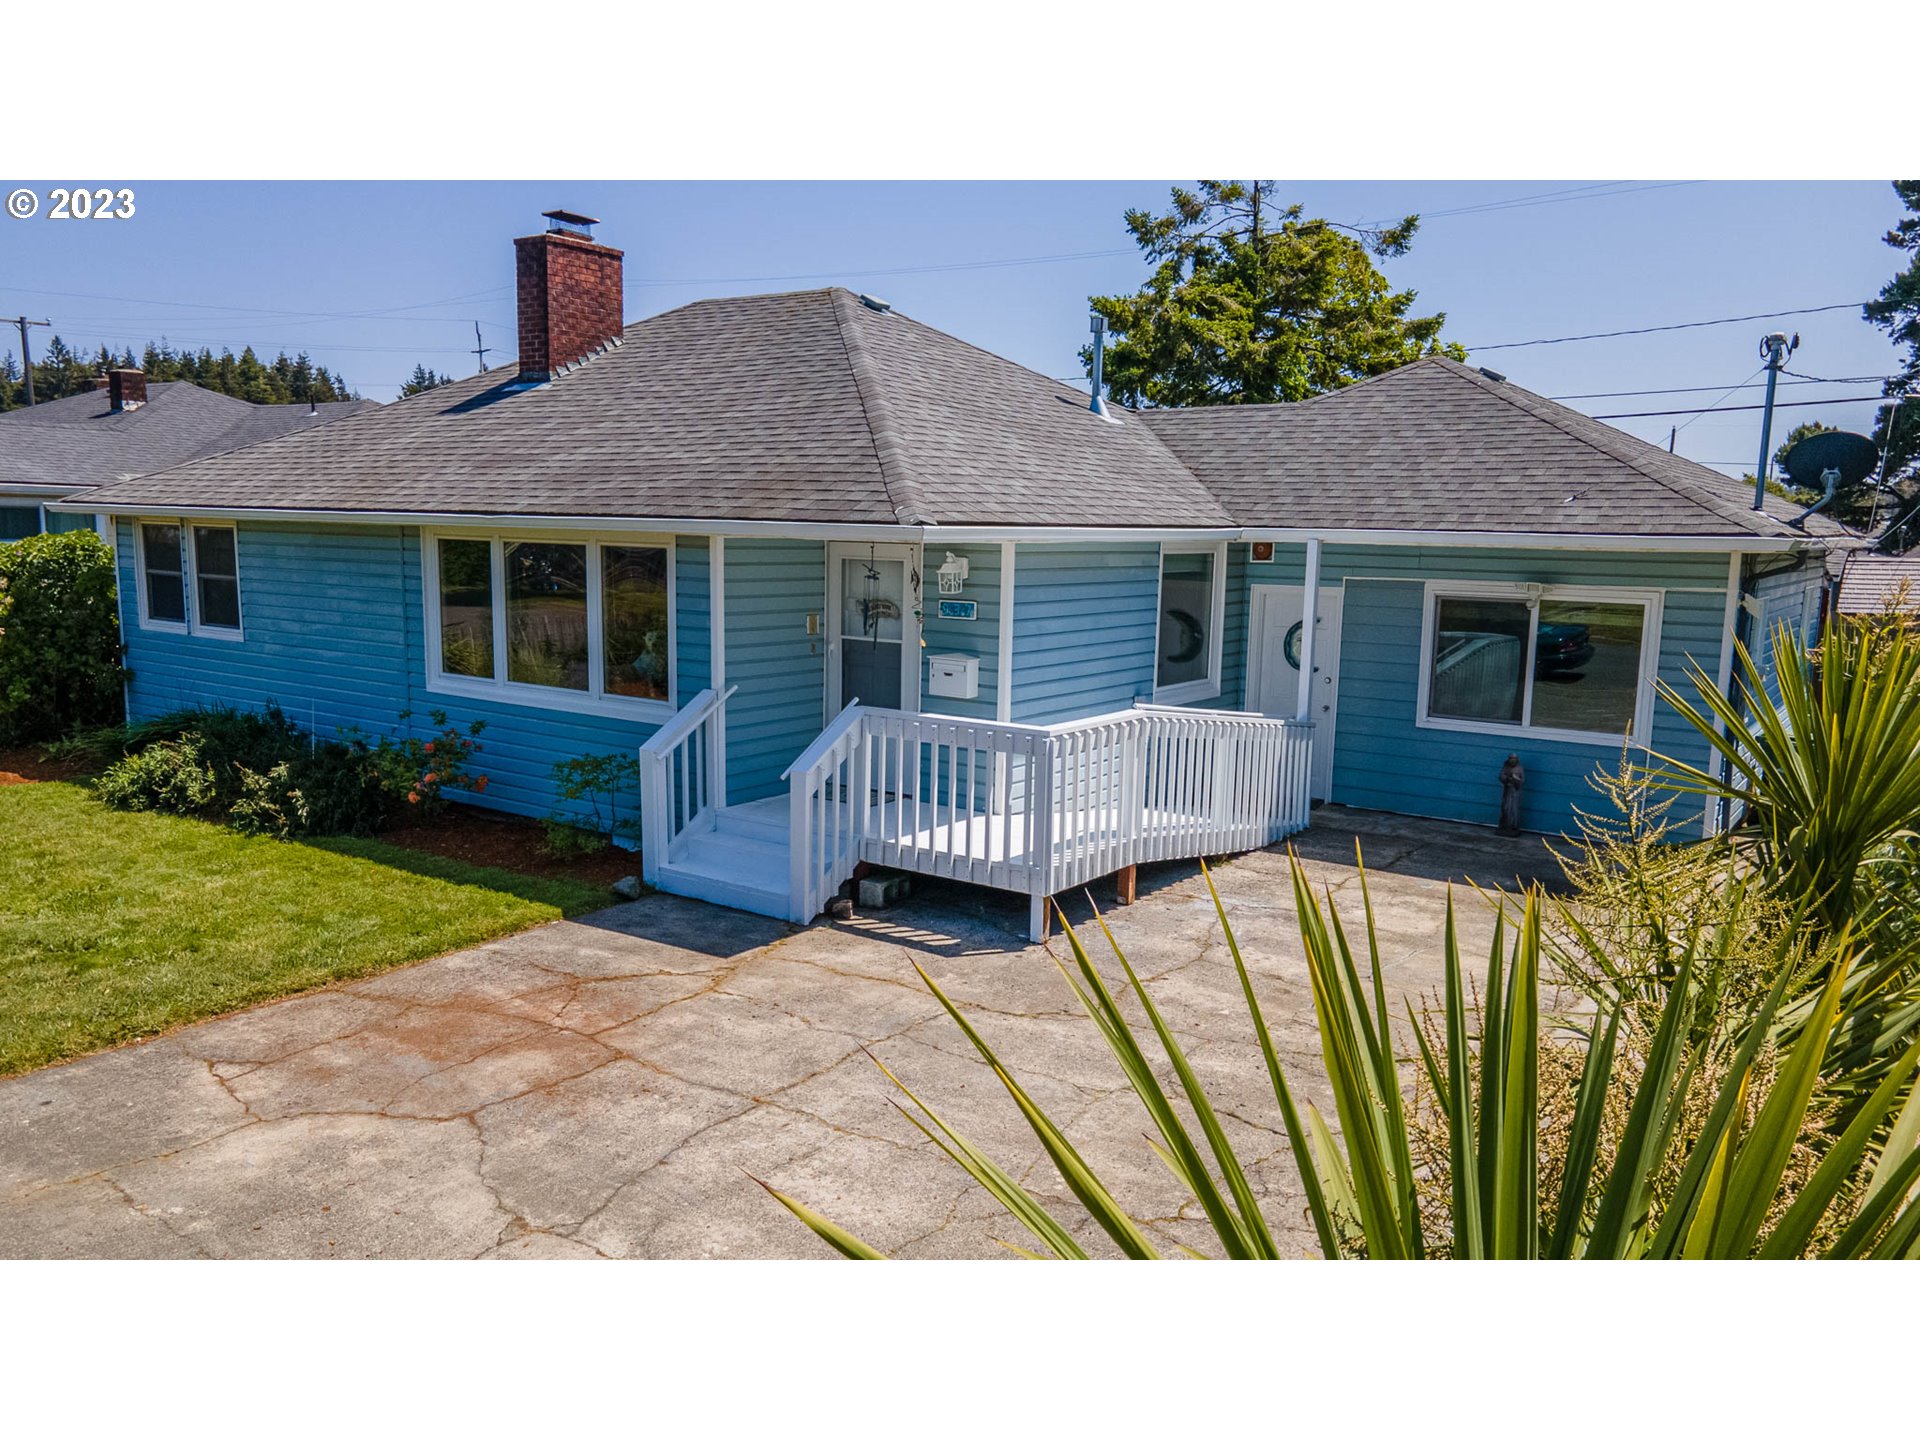 937 MICHIGAN AVE, Coos Bay, OR 97420